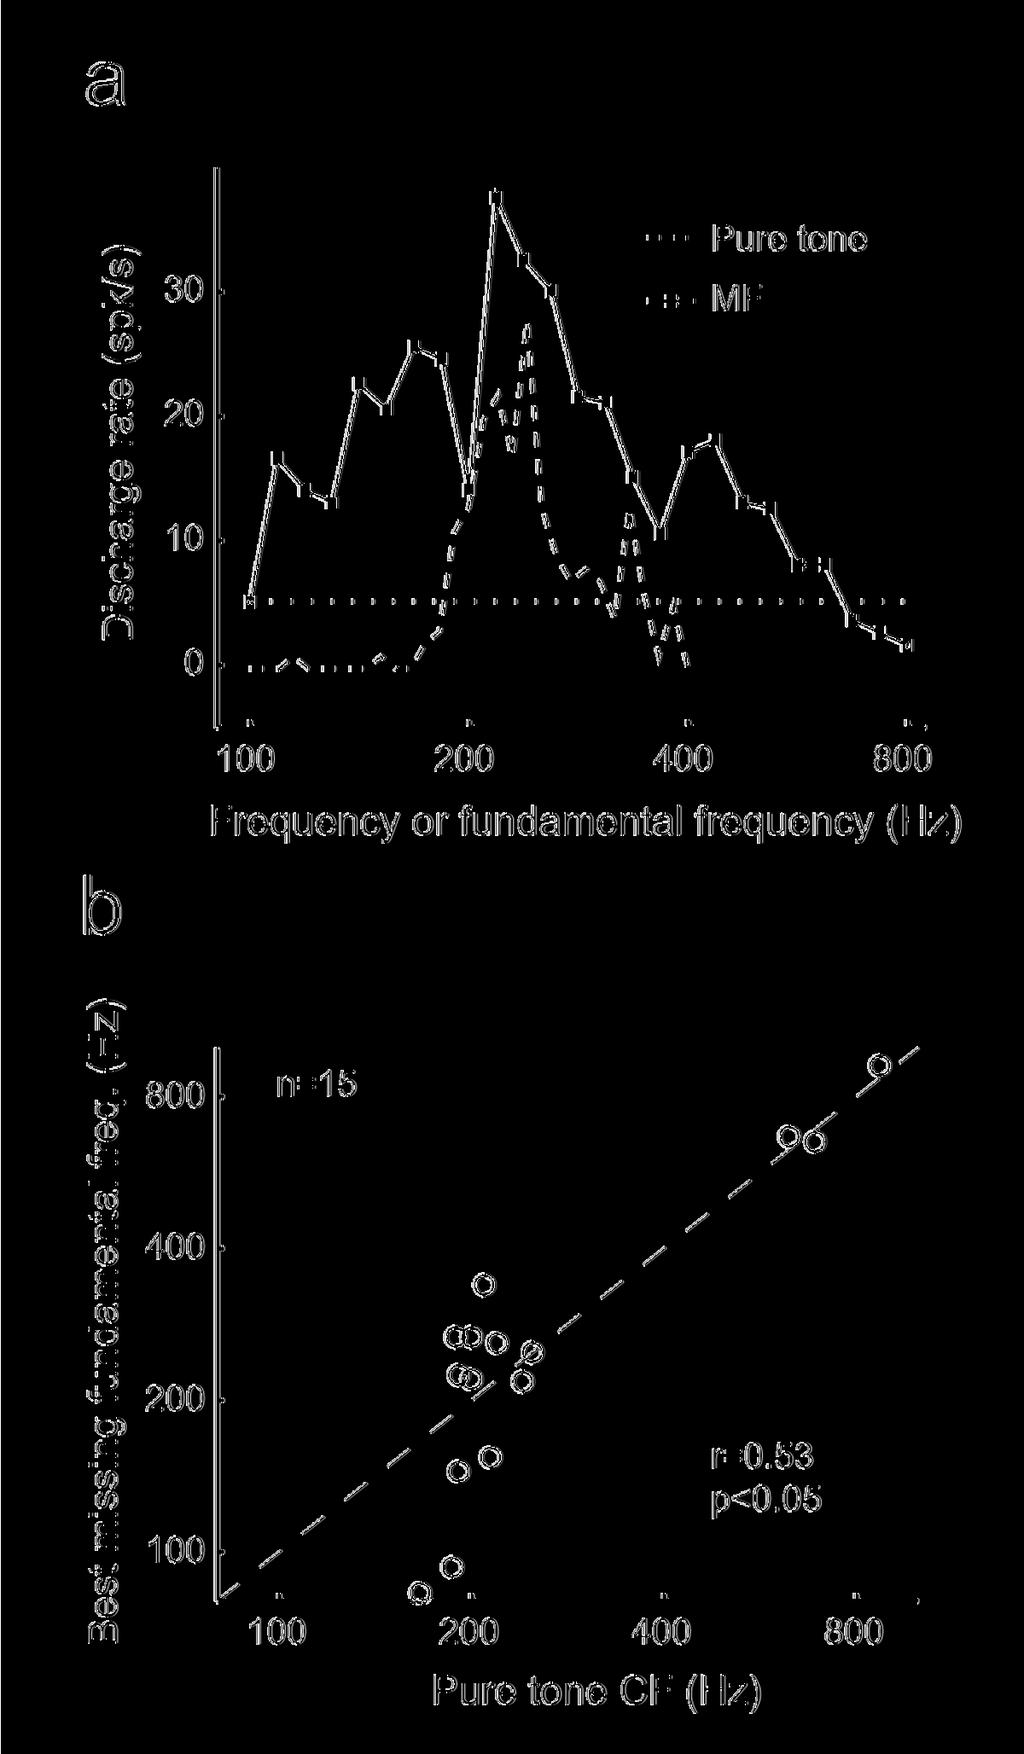 Bendor and Wang Page 10 of 13 Figure 3. Pitch-selective neurons share a similar tuning for pure tones and MFs. a. An example of an individual pitch-selective neuron s tuning to pure tone frequency and the fundamental frequency of MFs respectively.